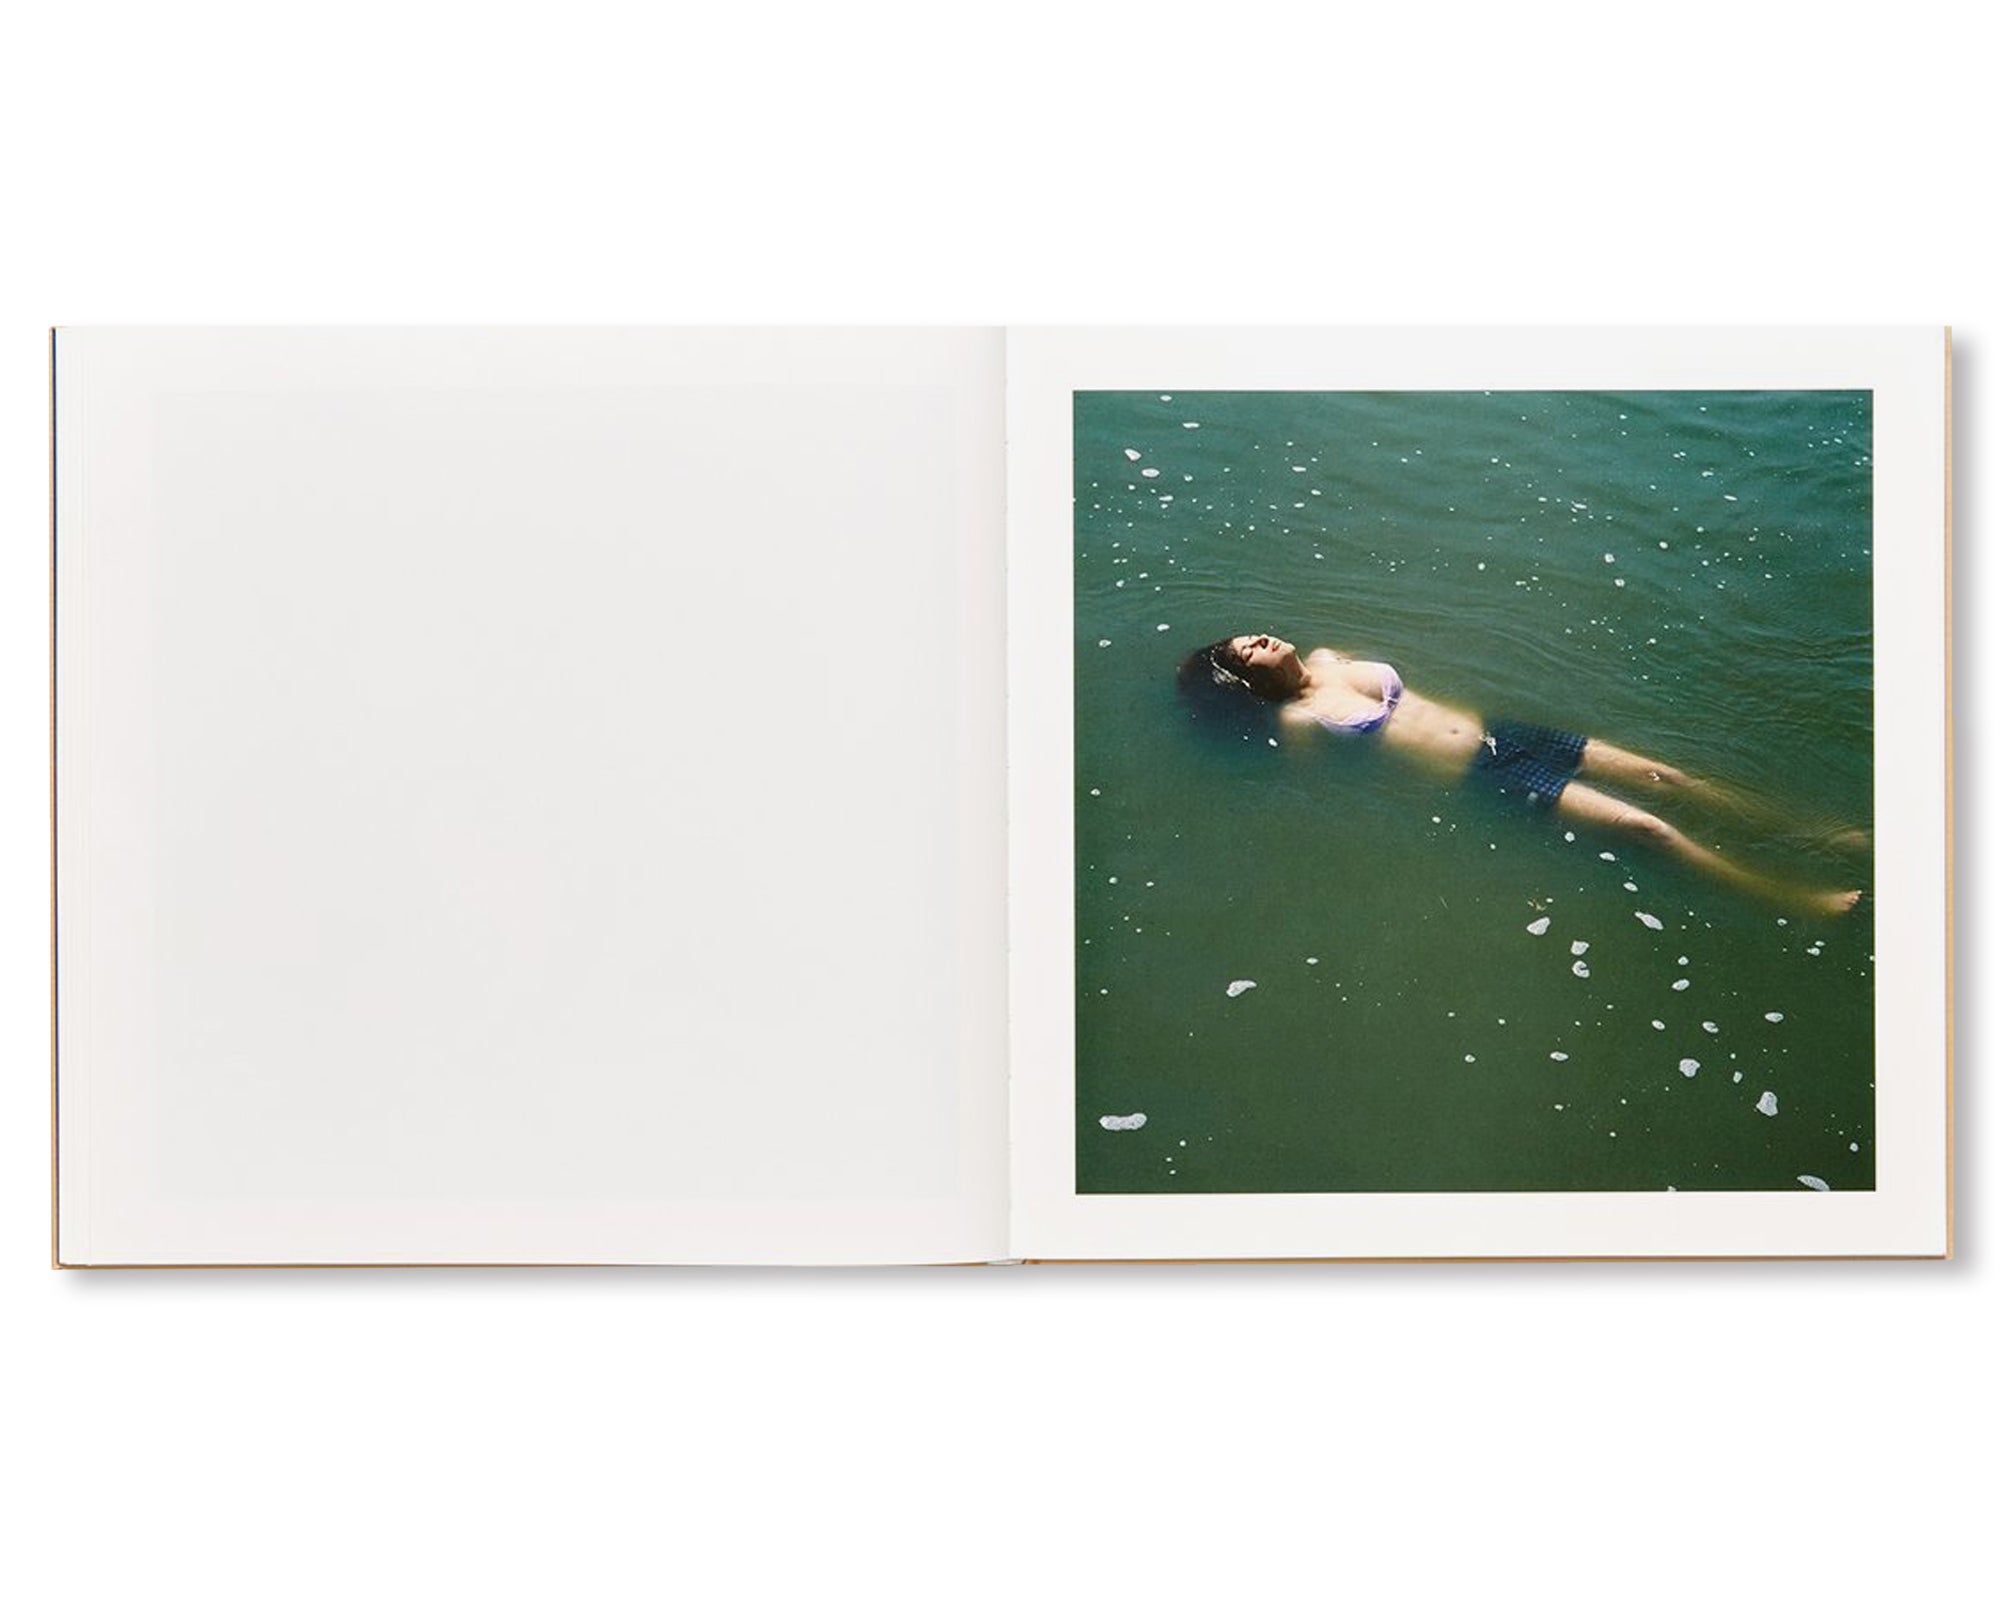 THE ADVENTURES OF GUILLE AND BELINDA AND THE ILLUSION OF AN EVERLASTING SUMMER by Alessandra Sanguinetti